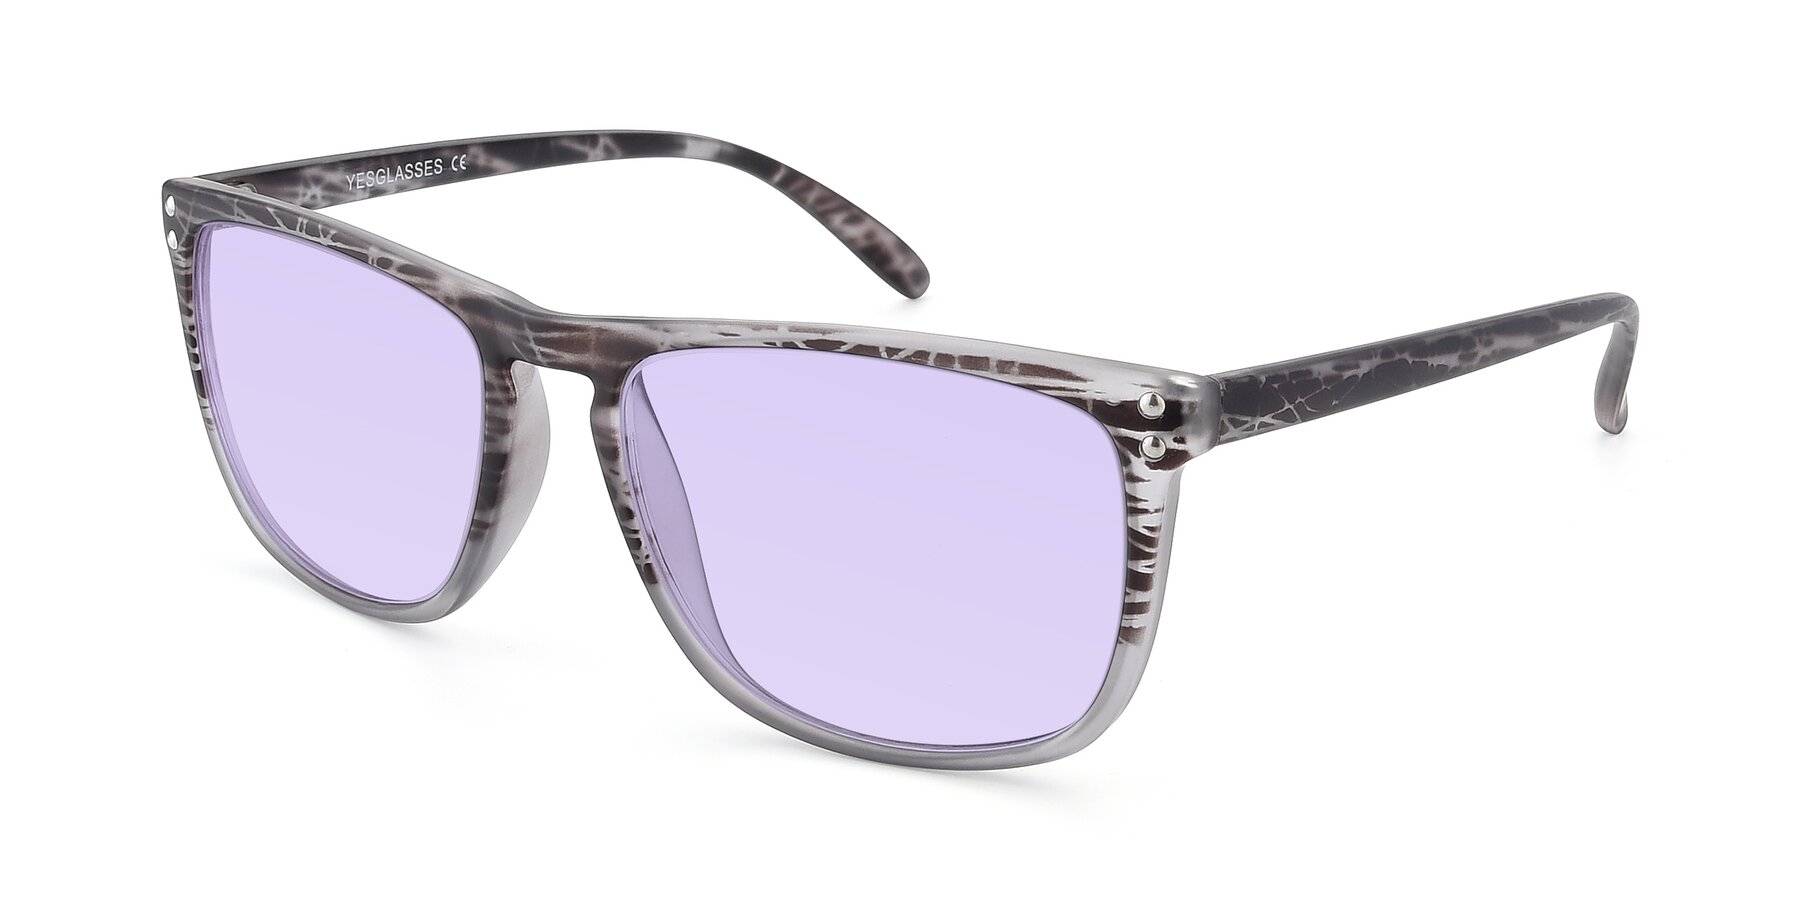 Angle of SSR411 in Translucent Floral Grey with Light Purple Tinted Lenses